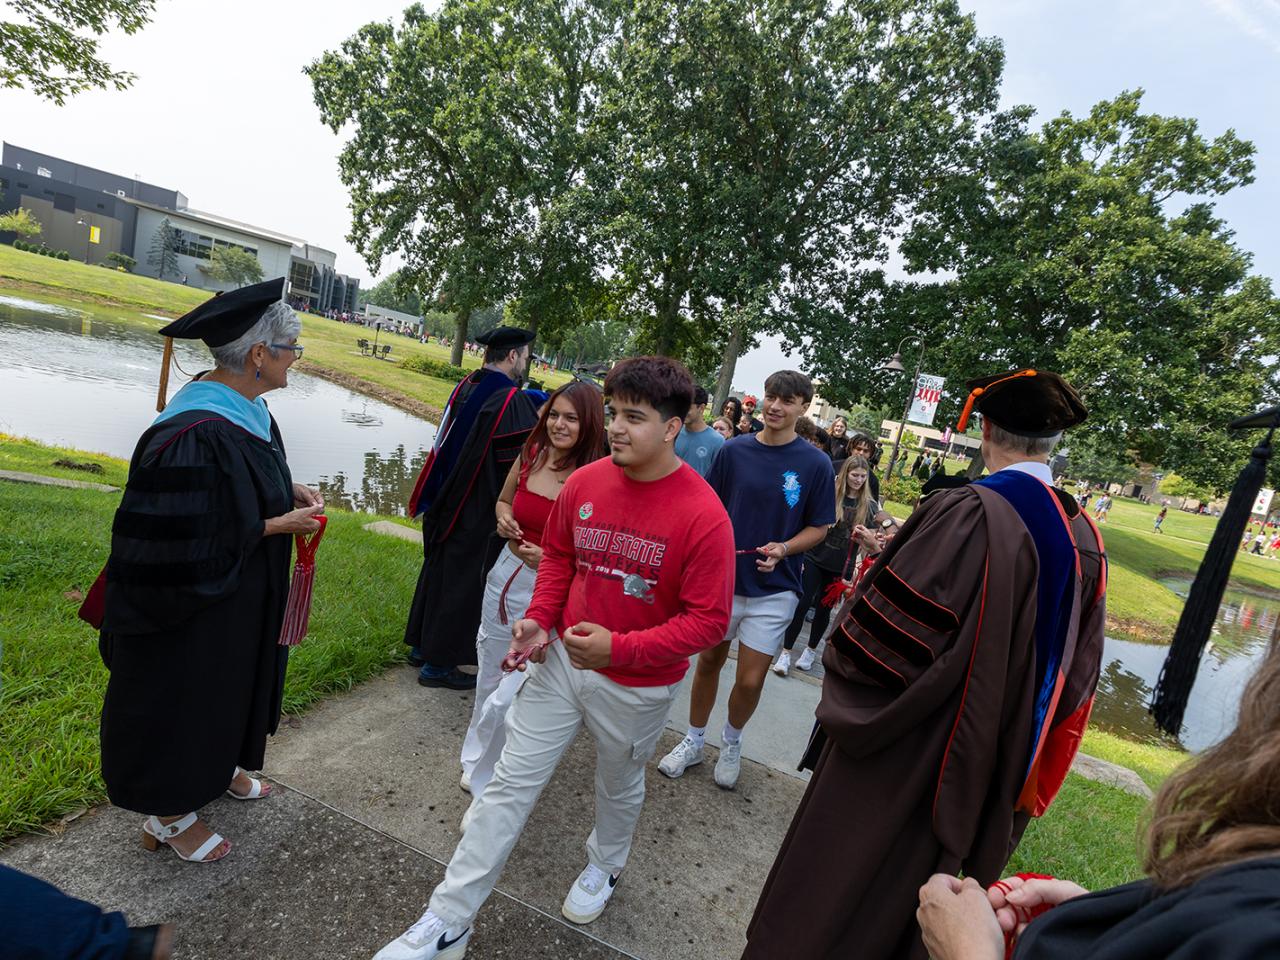 Students walk through faculty awaiting them on the bridge for the traditional bridge walk.